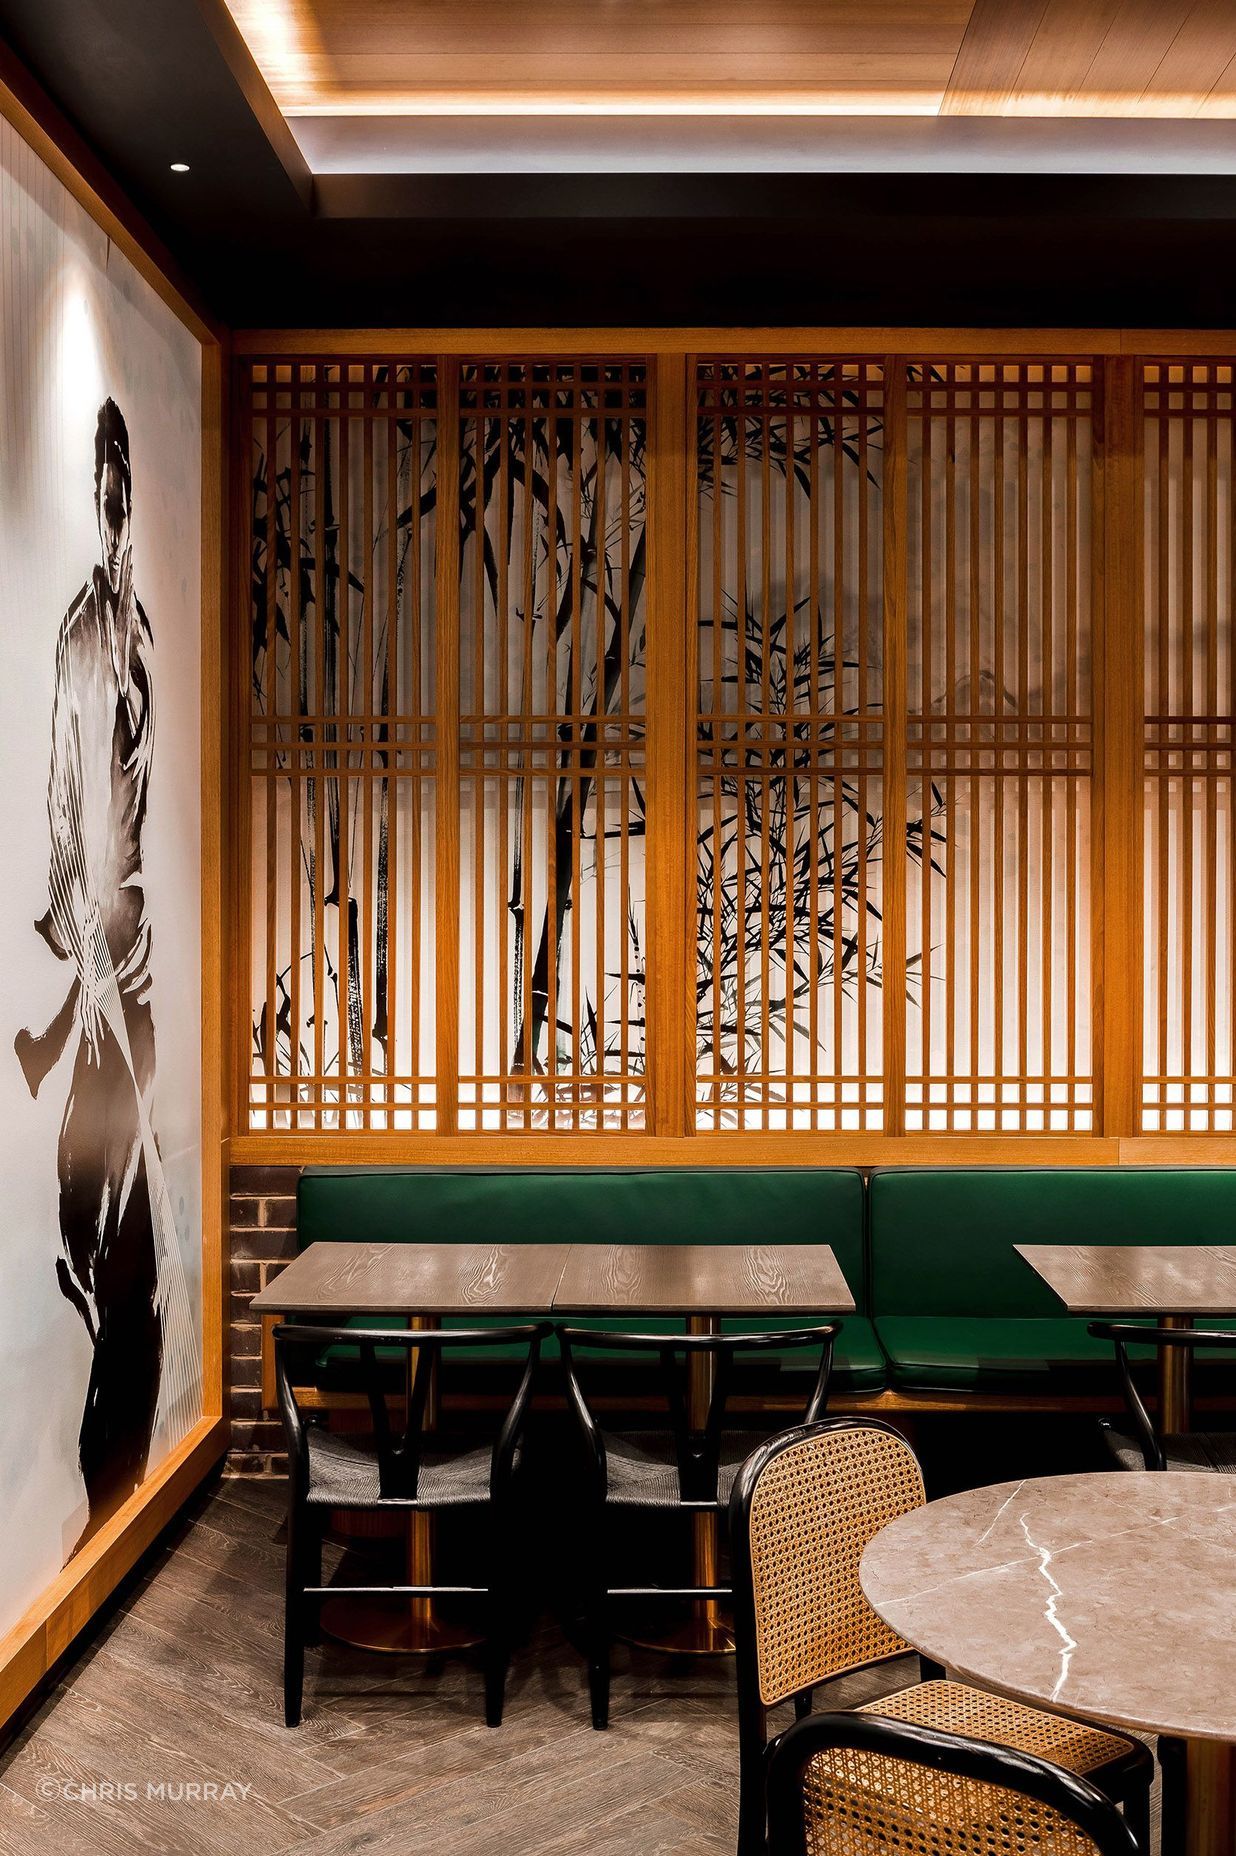 Elvin Tan's design blends undeniably Chinese imperial elements.